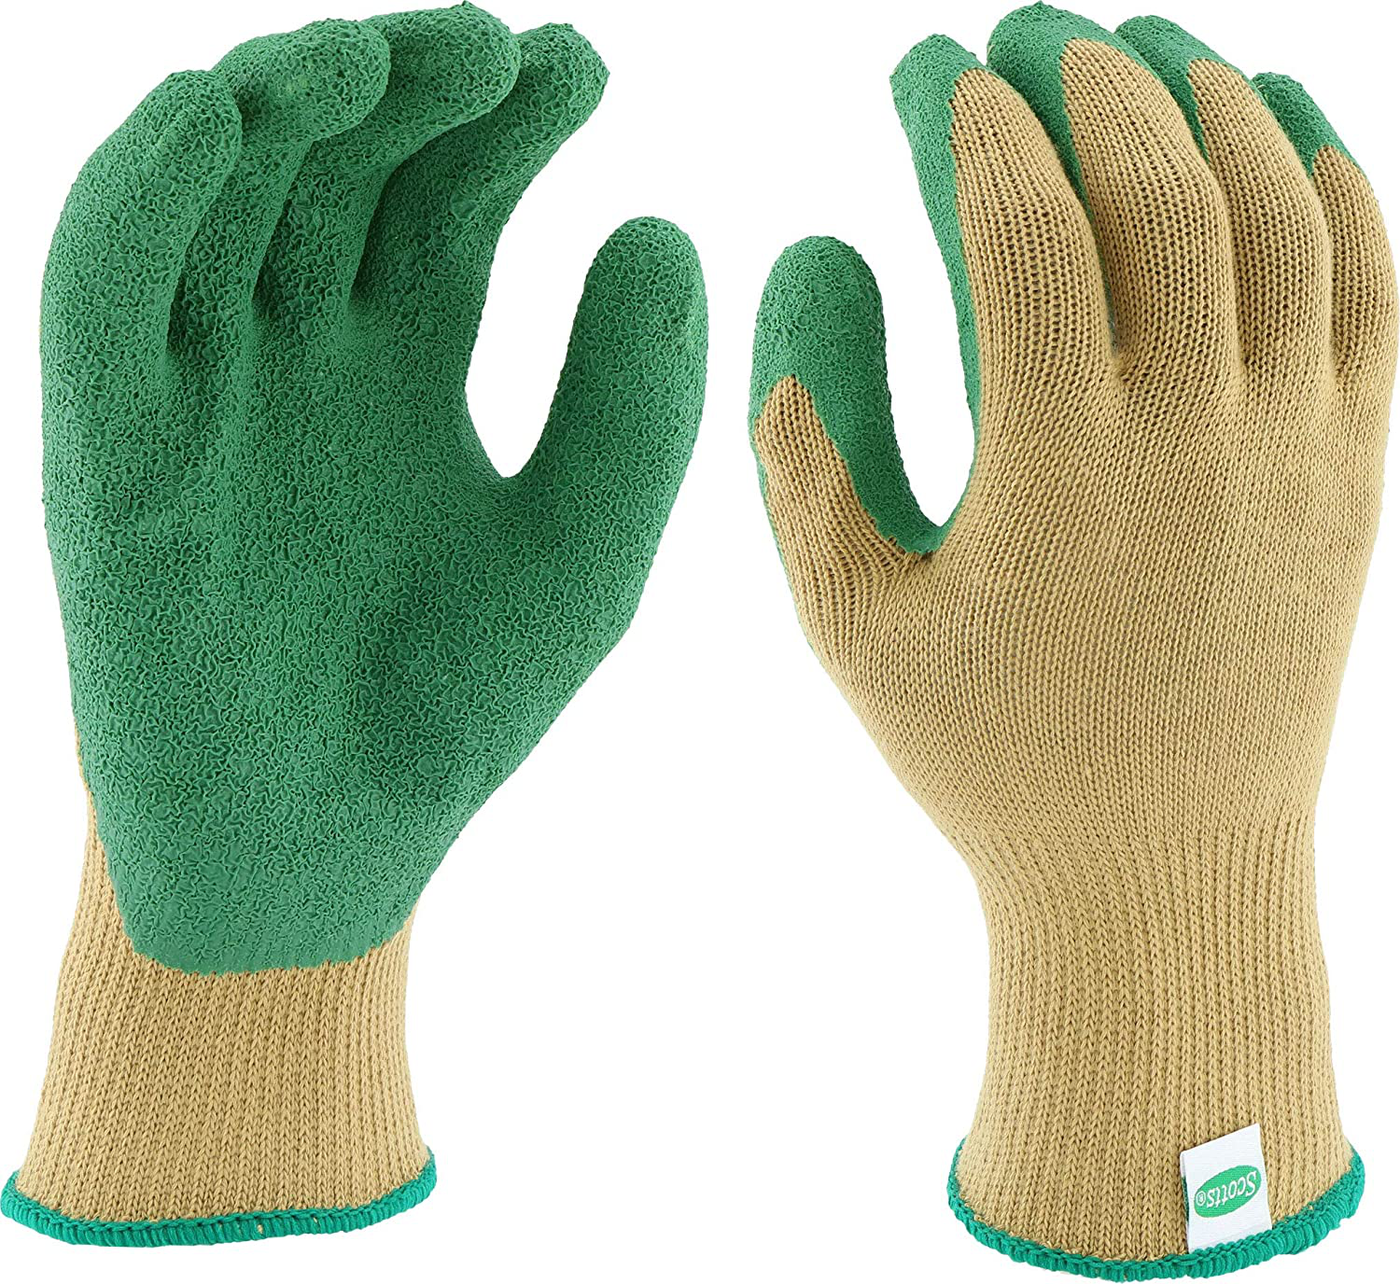 Stretch Knit Gardening Gloves with Latex Coated Palm